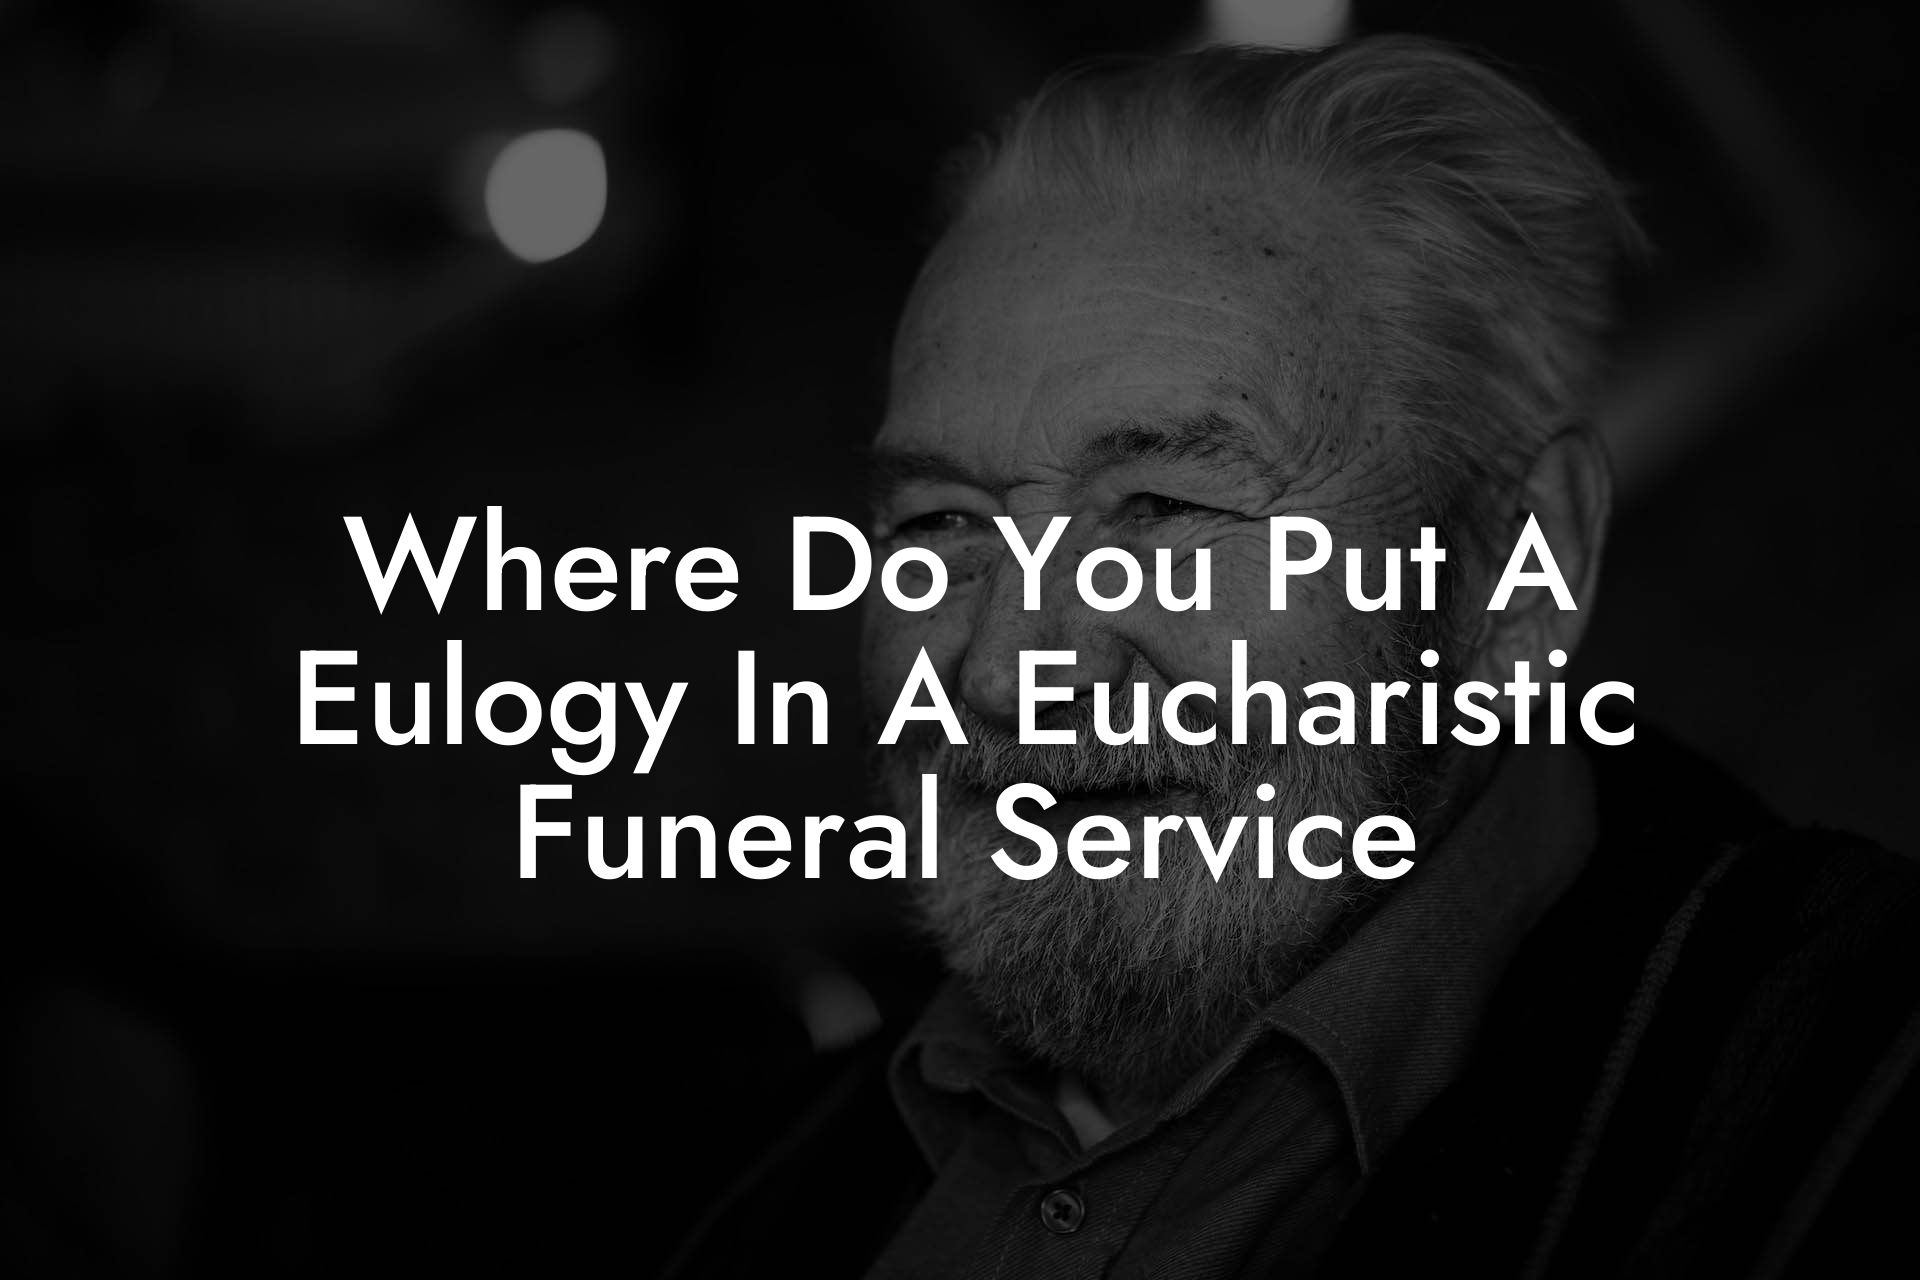 Where Do You Put A Eulogy In A Eucharistic Funeral Service